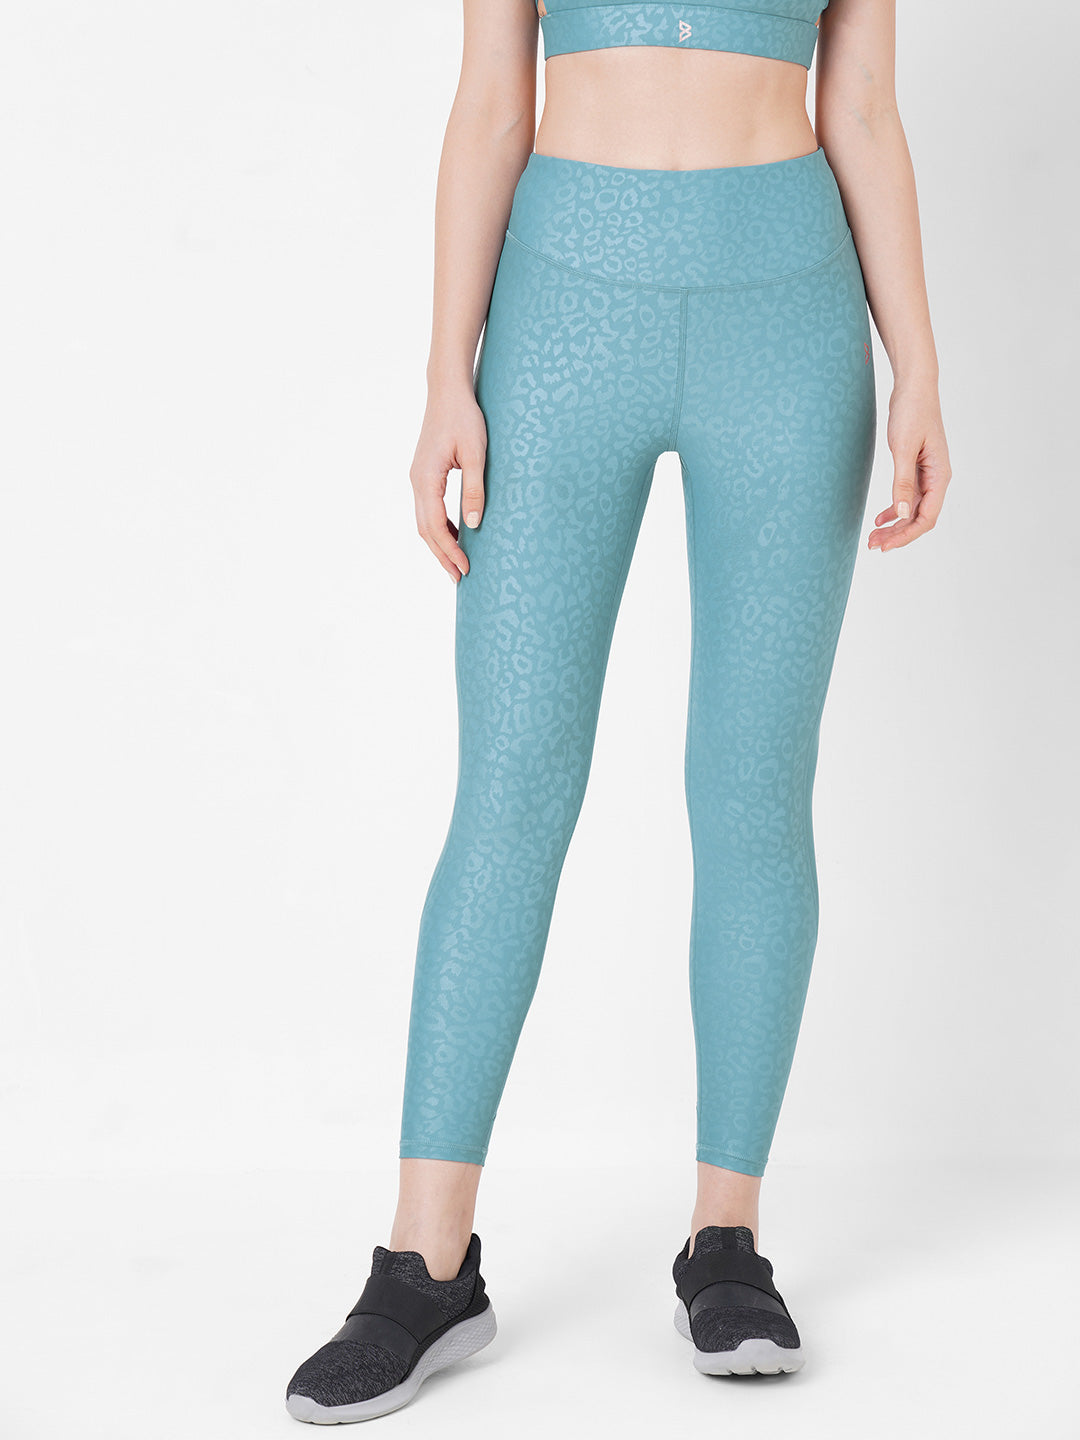 Missguided MSGD co-ord legging with deep waistband in teal, ASOS in 2023